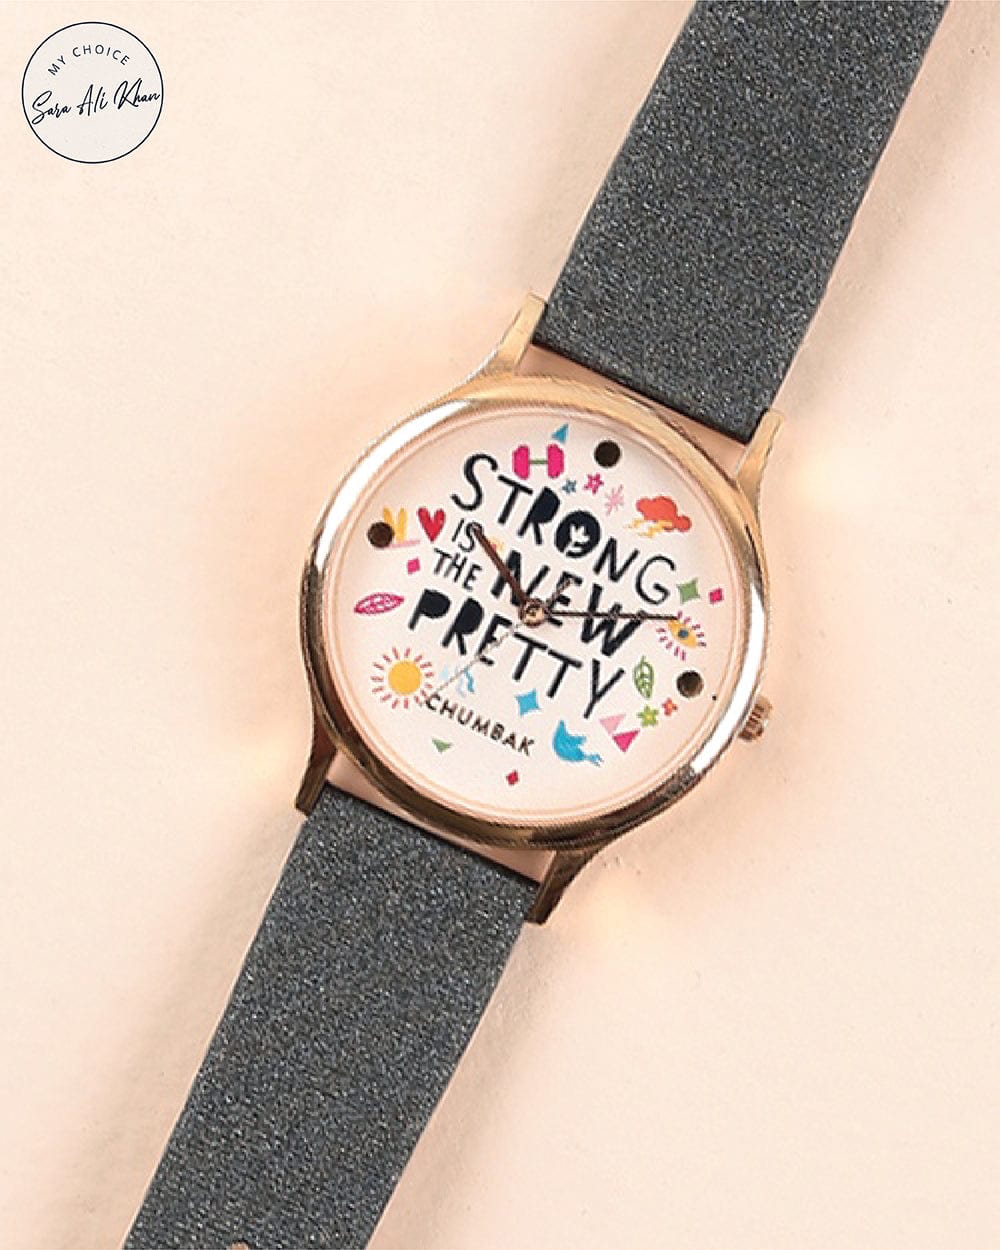 Women's Teal By Strong Is The New Pretty Wrist Watch - Chumbak